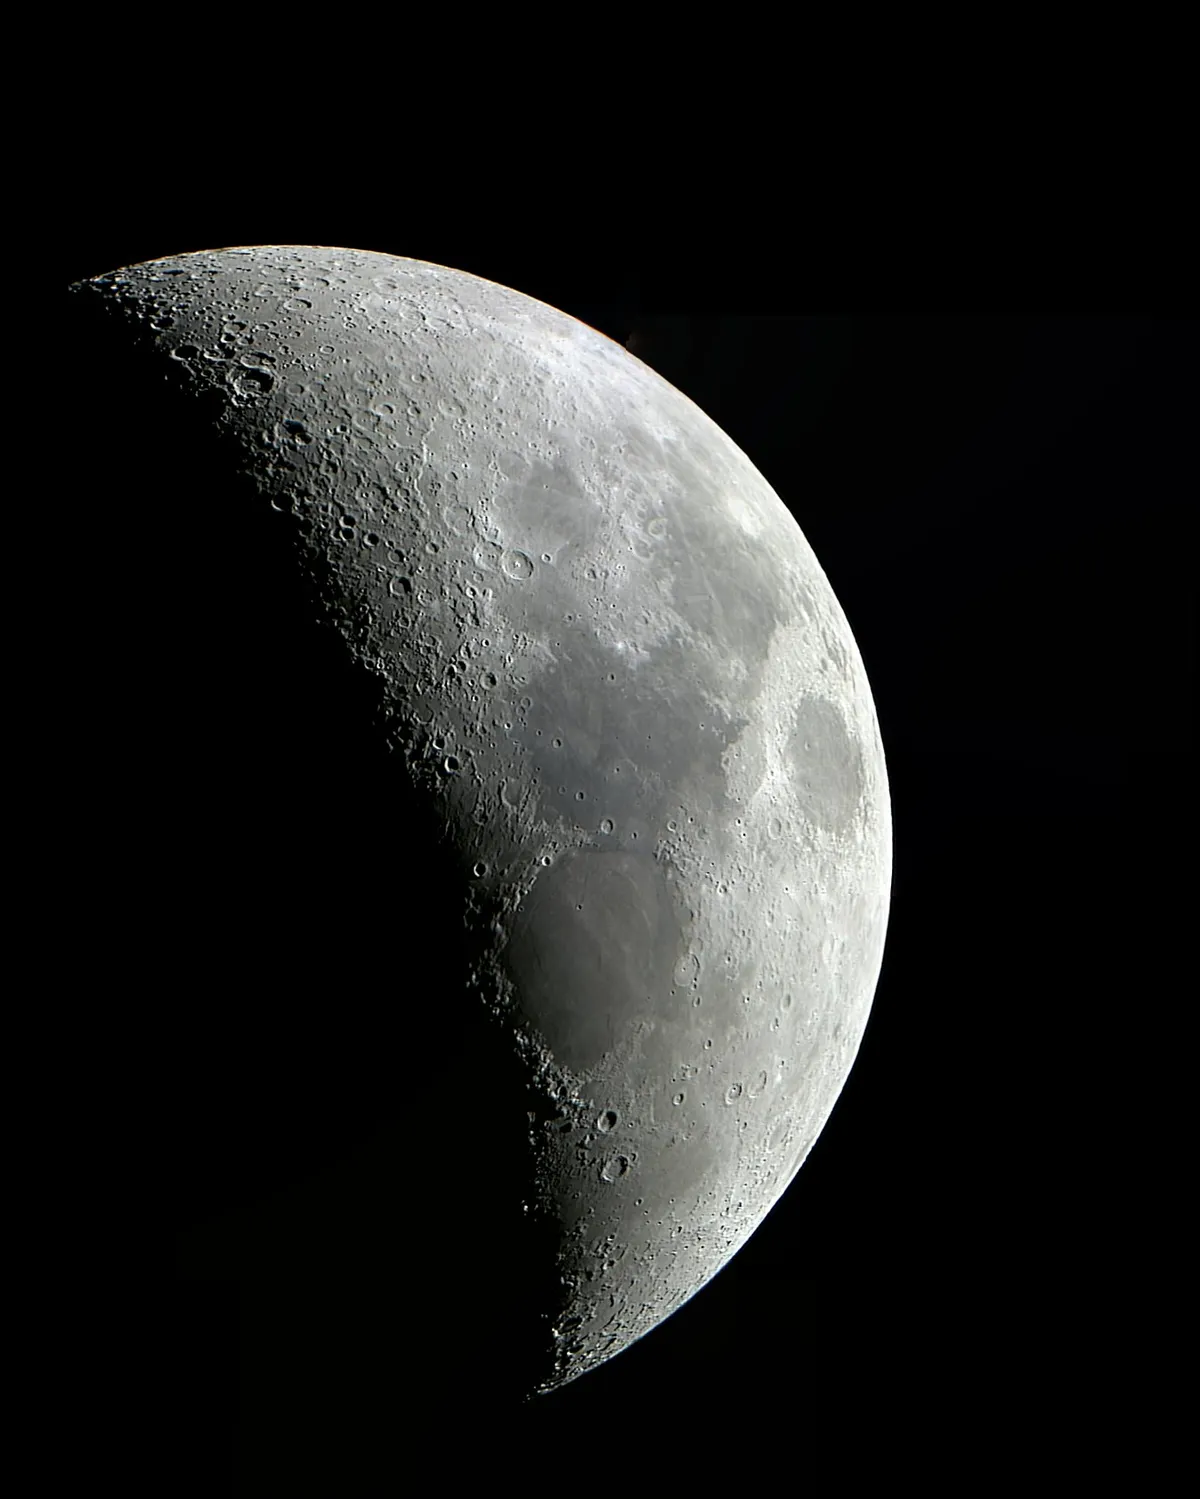 Waxing Moon by Simon Hurrell, West Berkshire, UK. Equipment: Celestron 127SLT, Flashed SPC880NC, IR Filter, Astro engineering focal reducer.